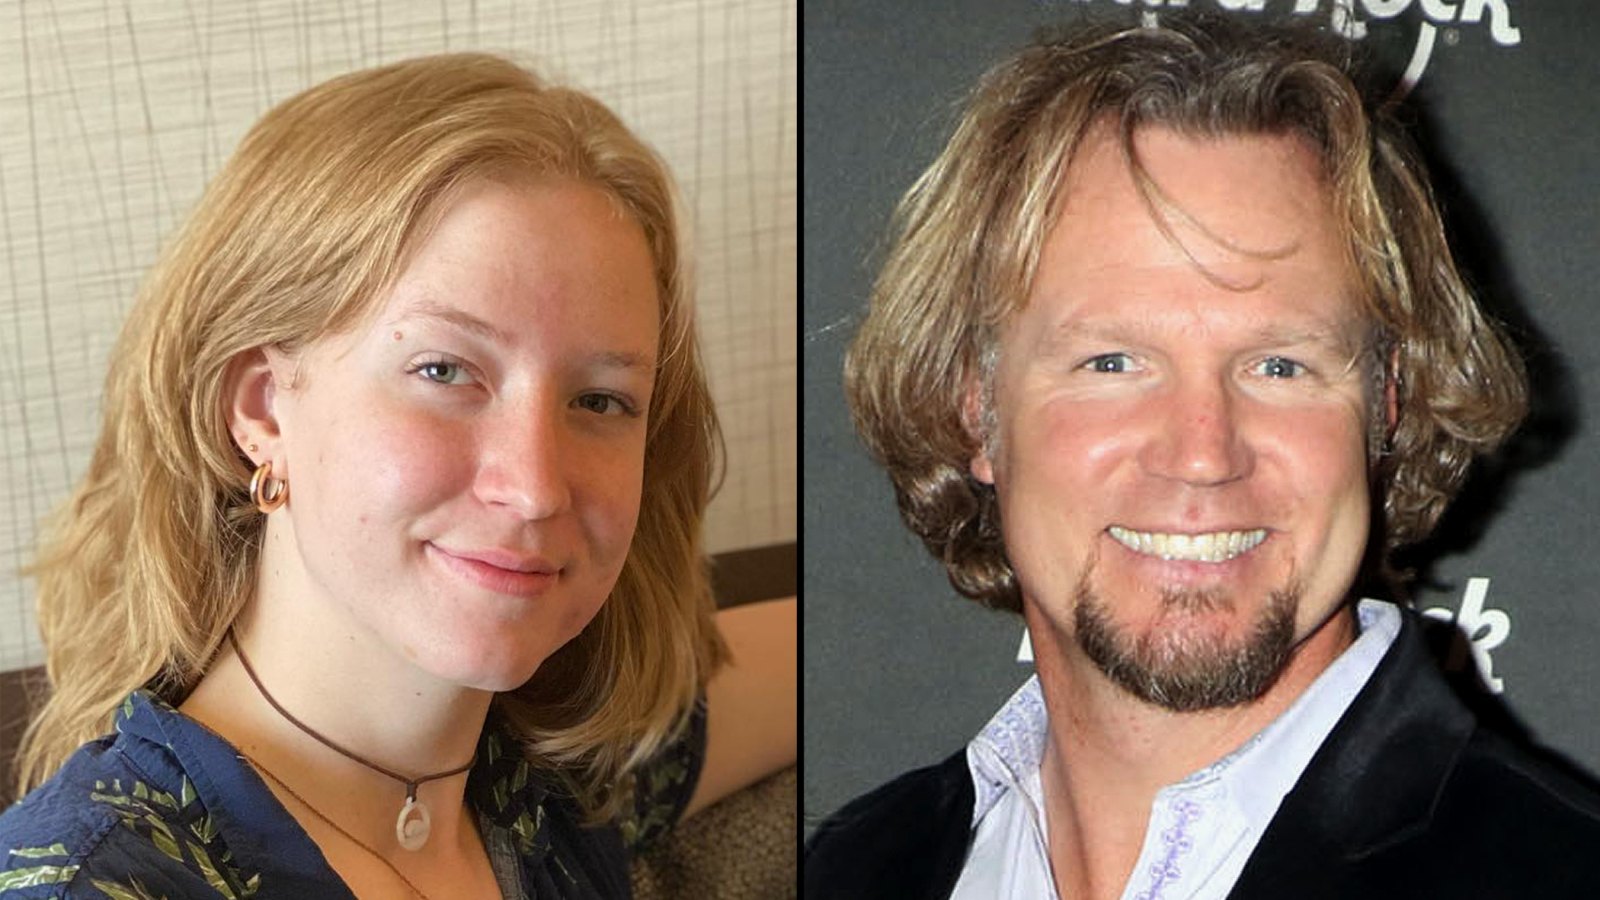 Sister Wives' Gwendlyn Brown Claims Dad Kody Brown 'Preferred' His Sons Over Daughters: The Girls 'Did Not Have It as Good'